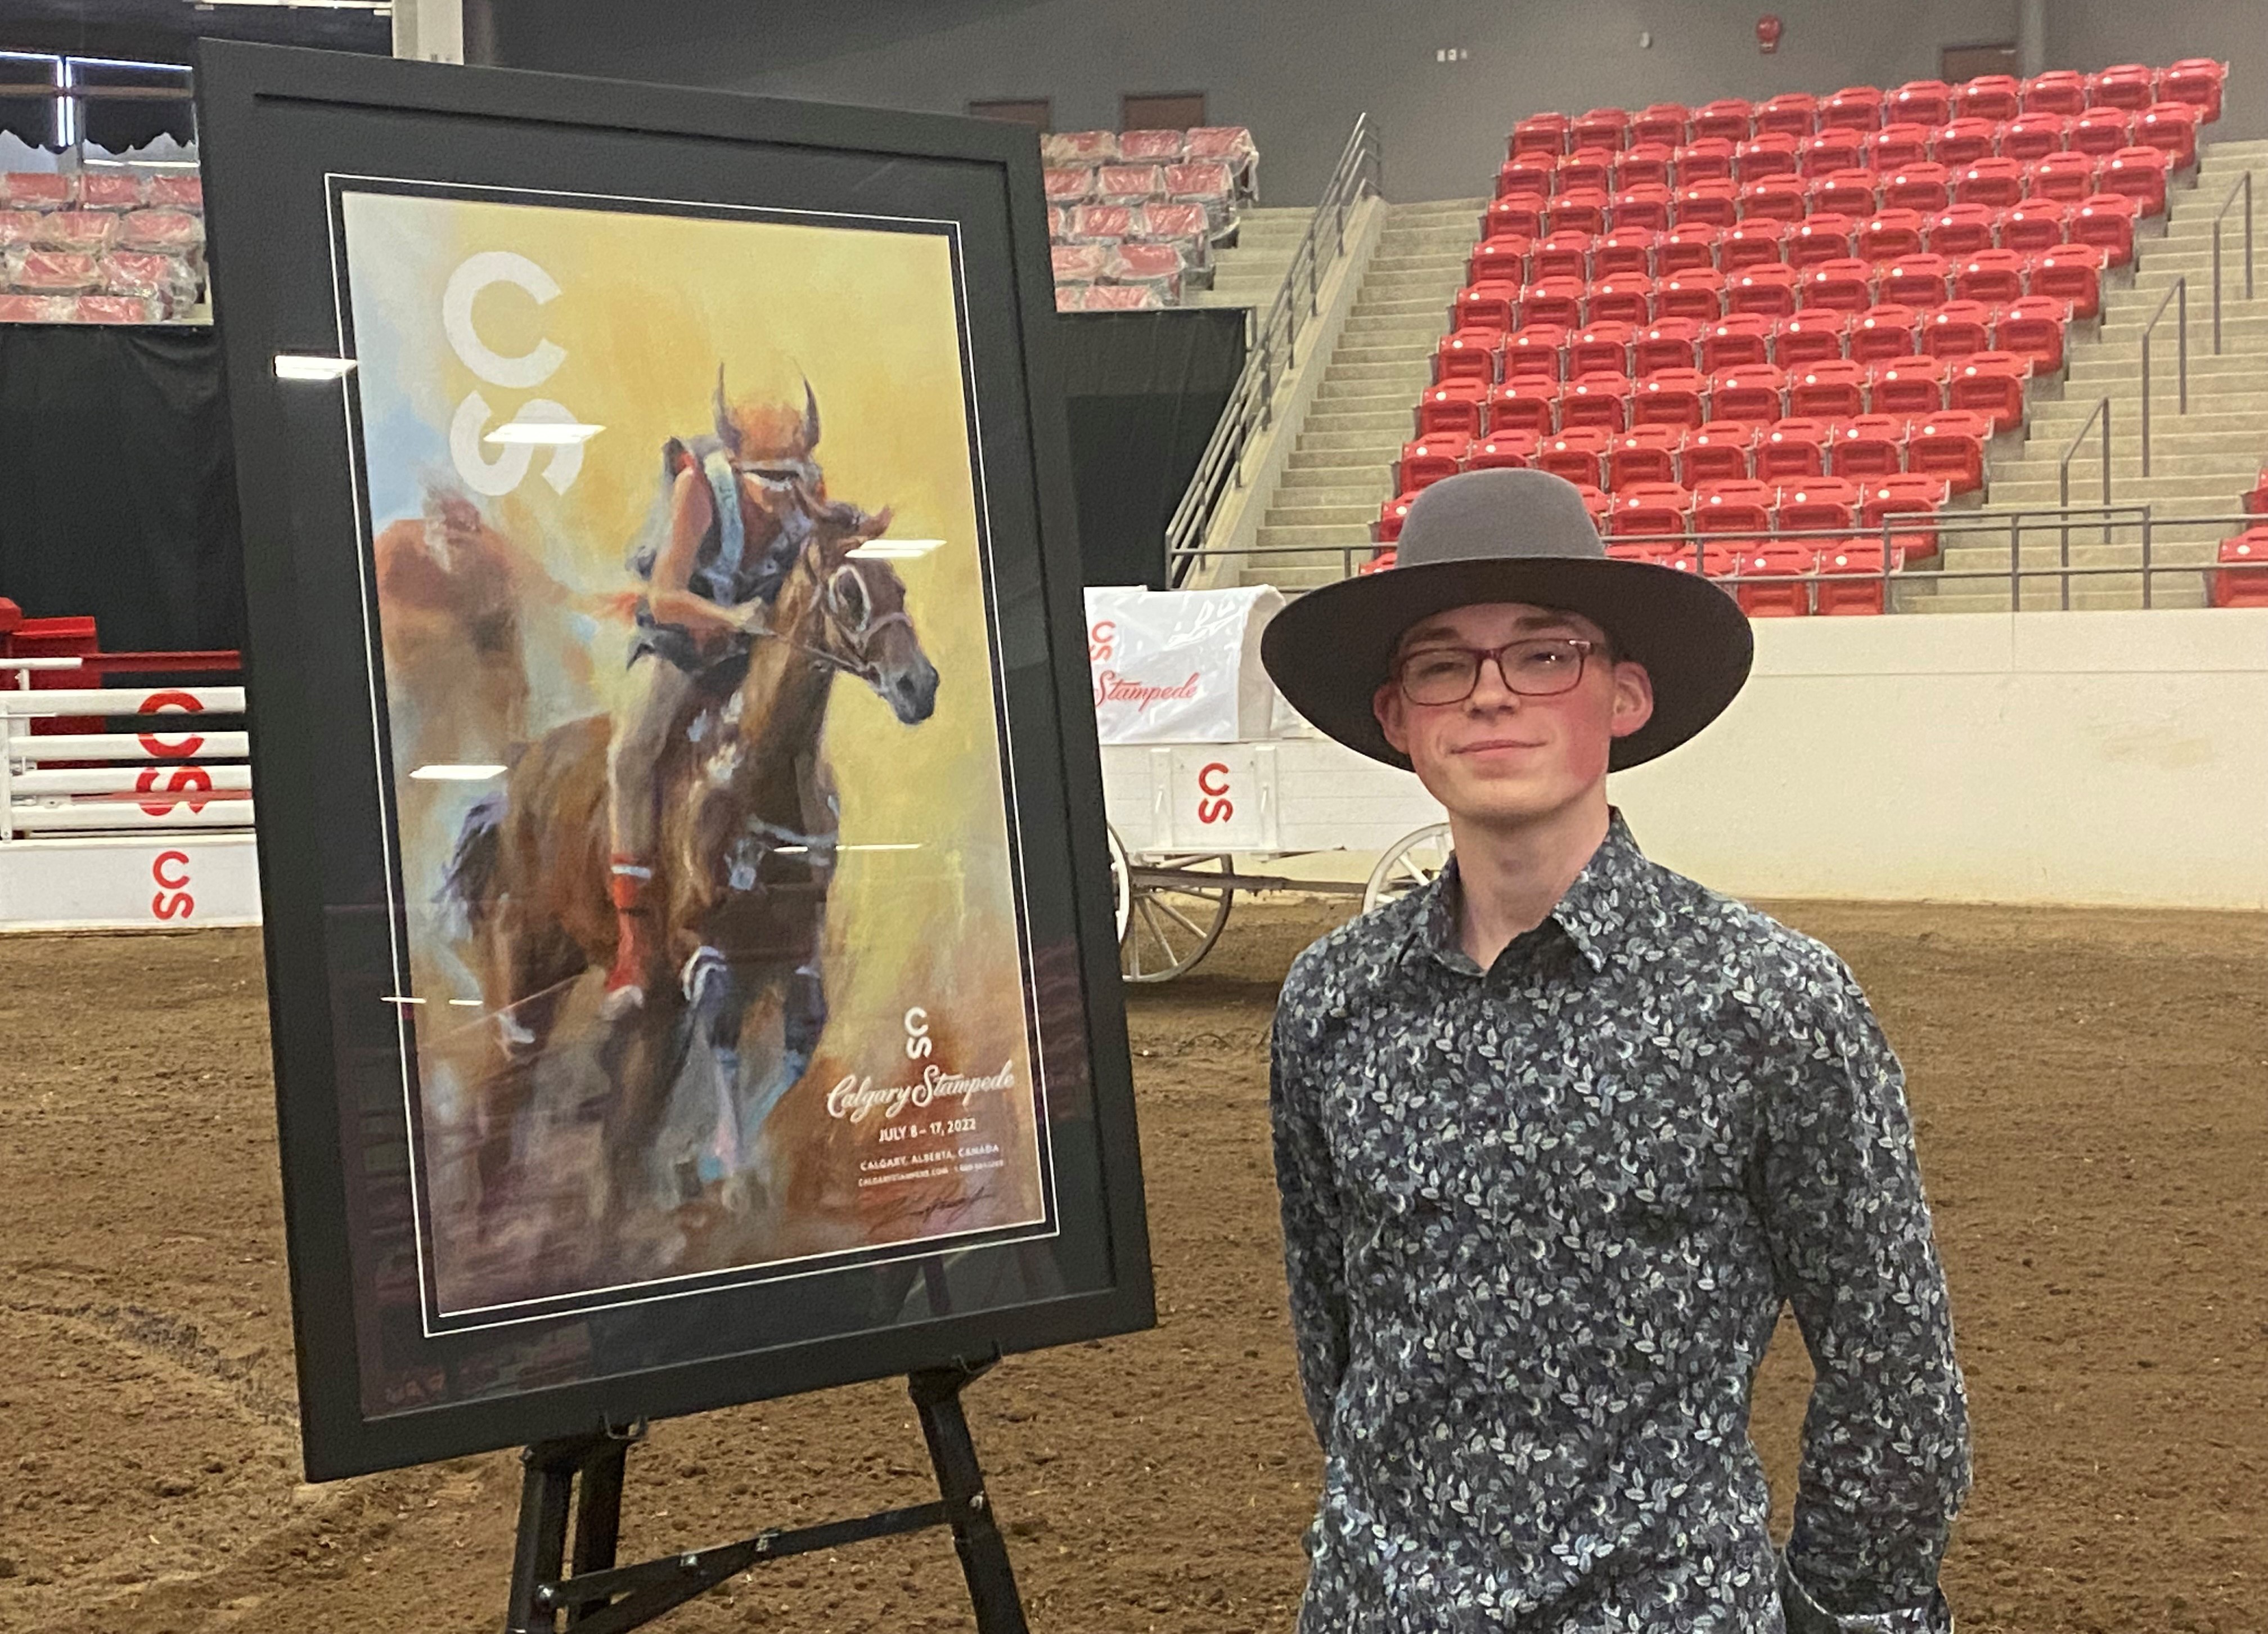 Calgary Stampede plans 2021 comeback, releases new poster - Calgary